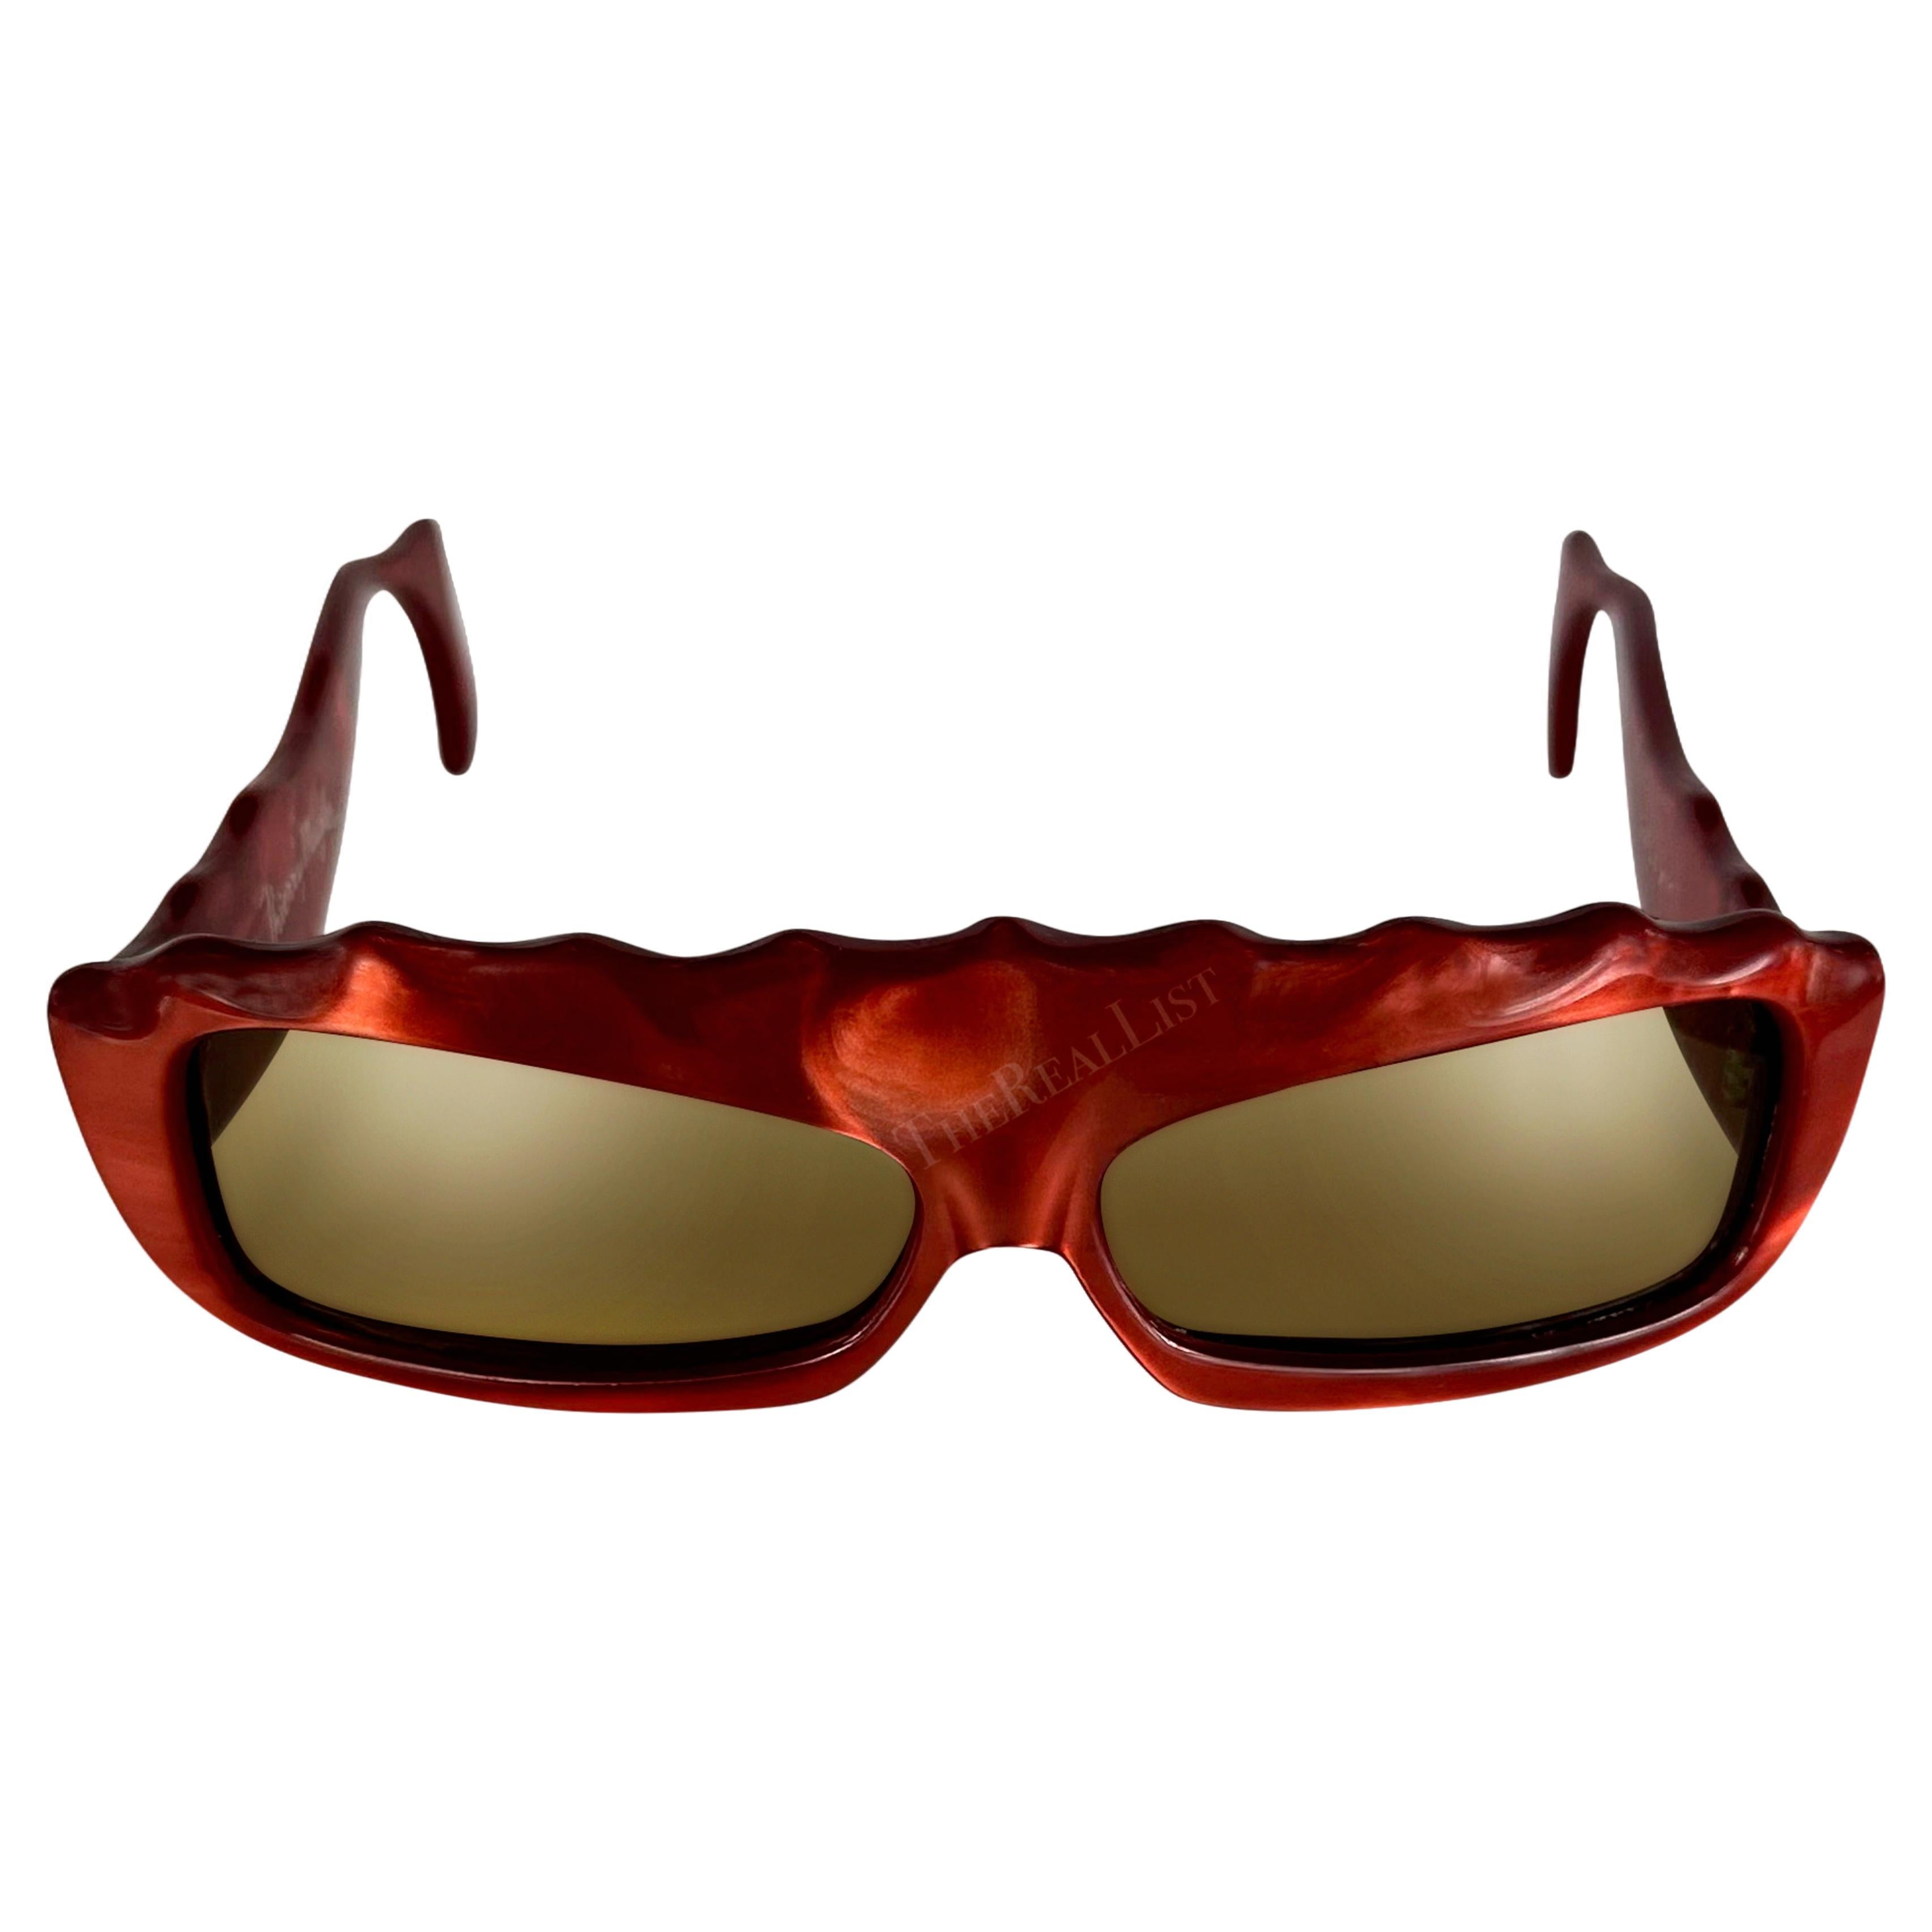 Women's S/S 1979 Thierry Mugler Red Opalescent Red Sculpted Rectangular Sunglasses For Sale